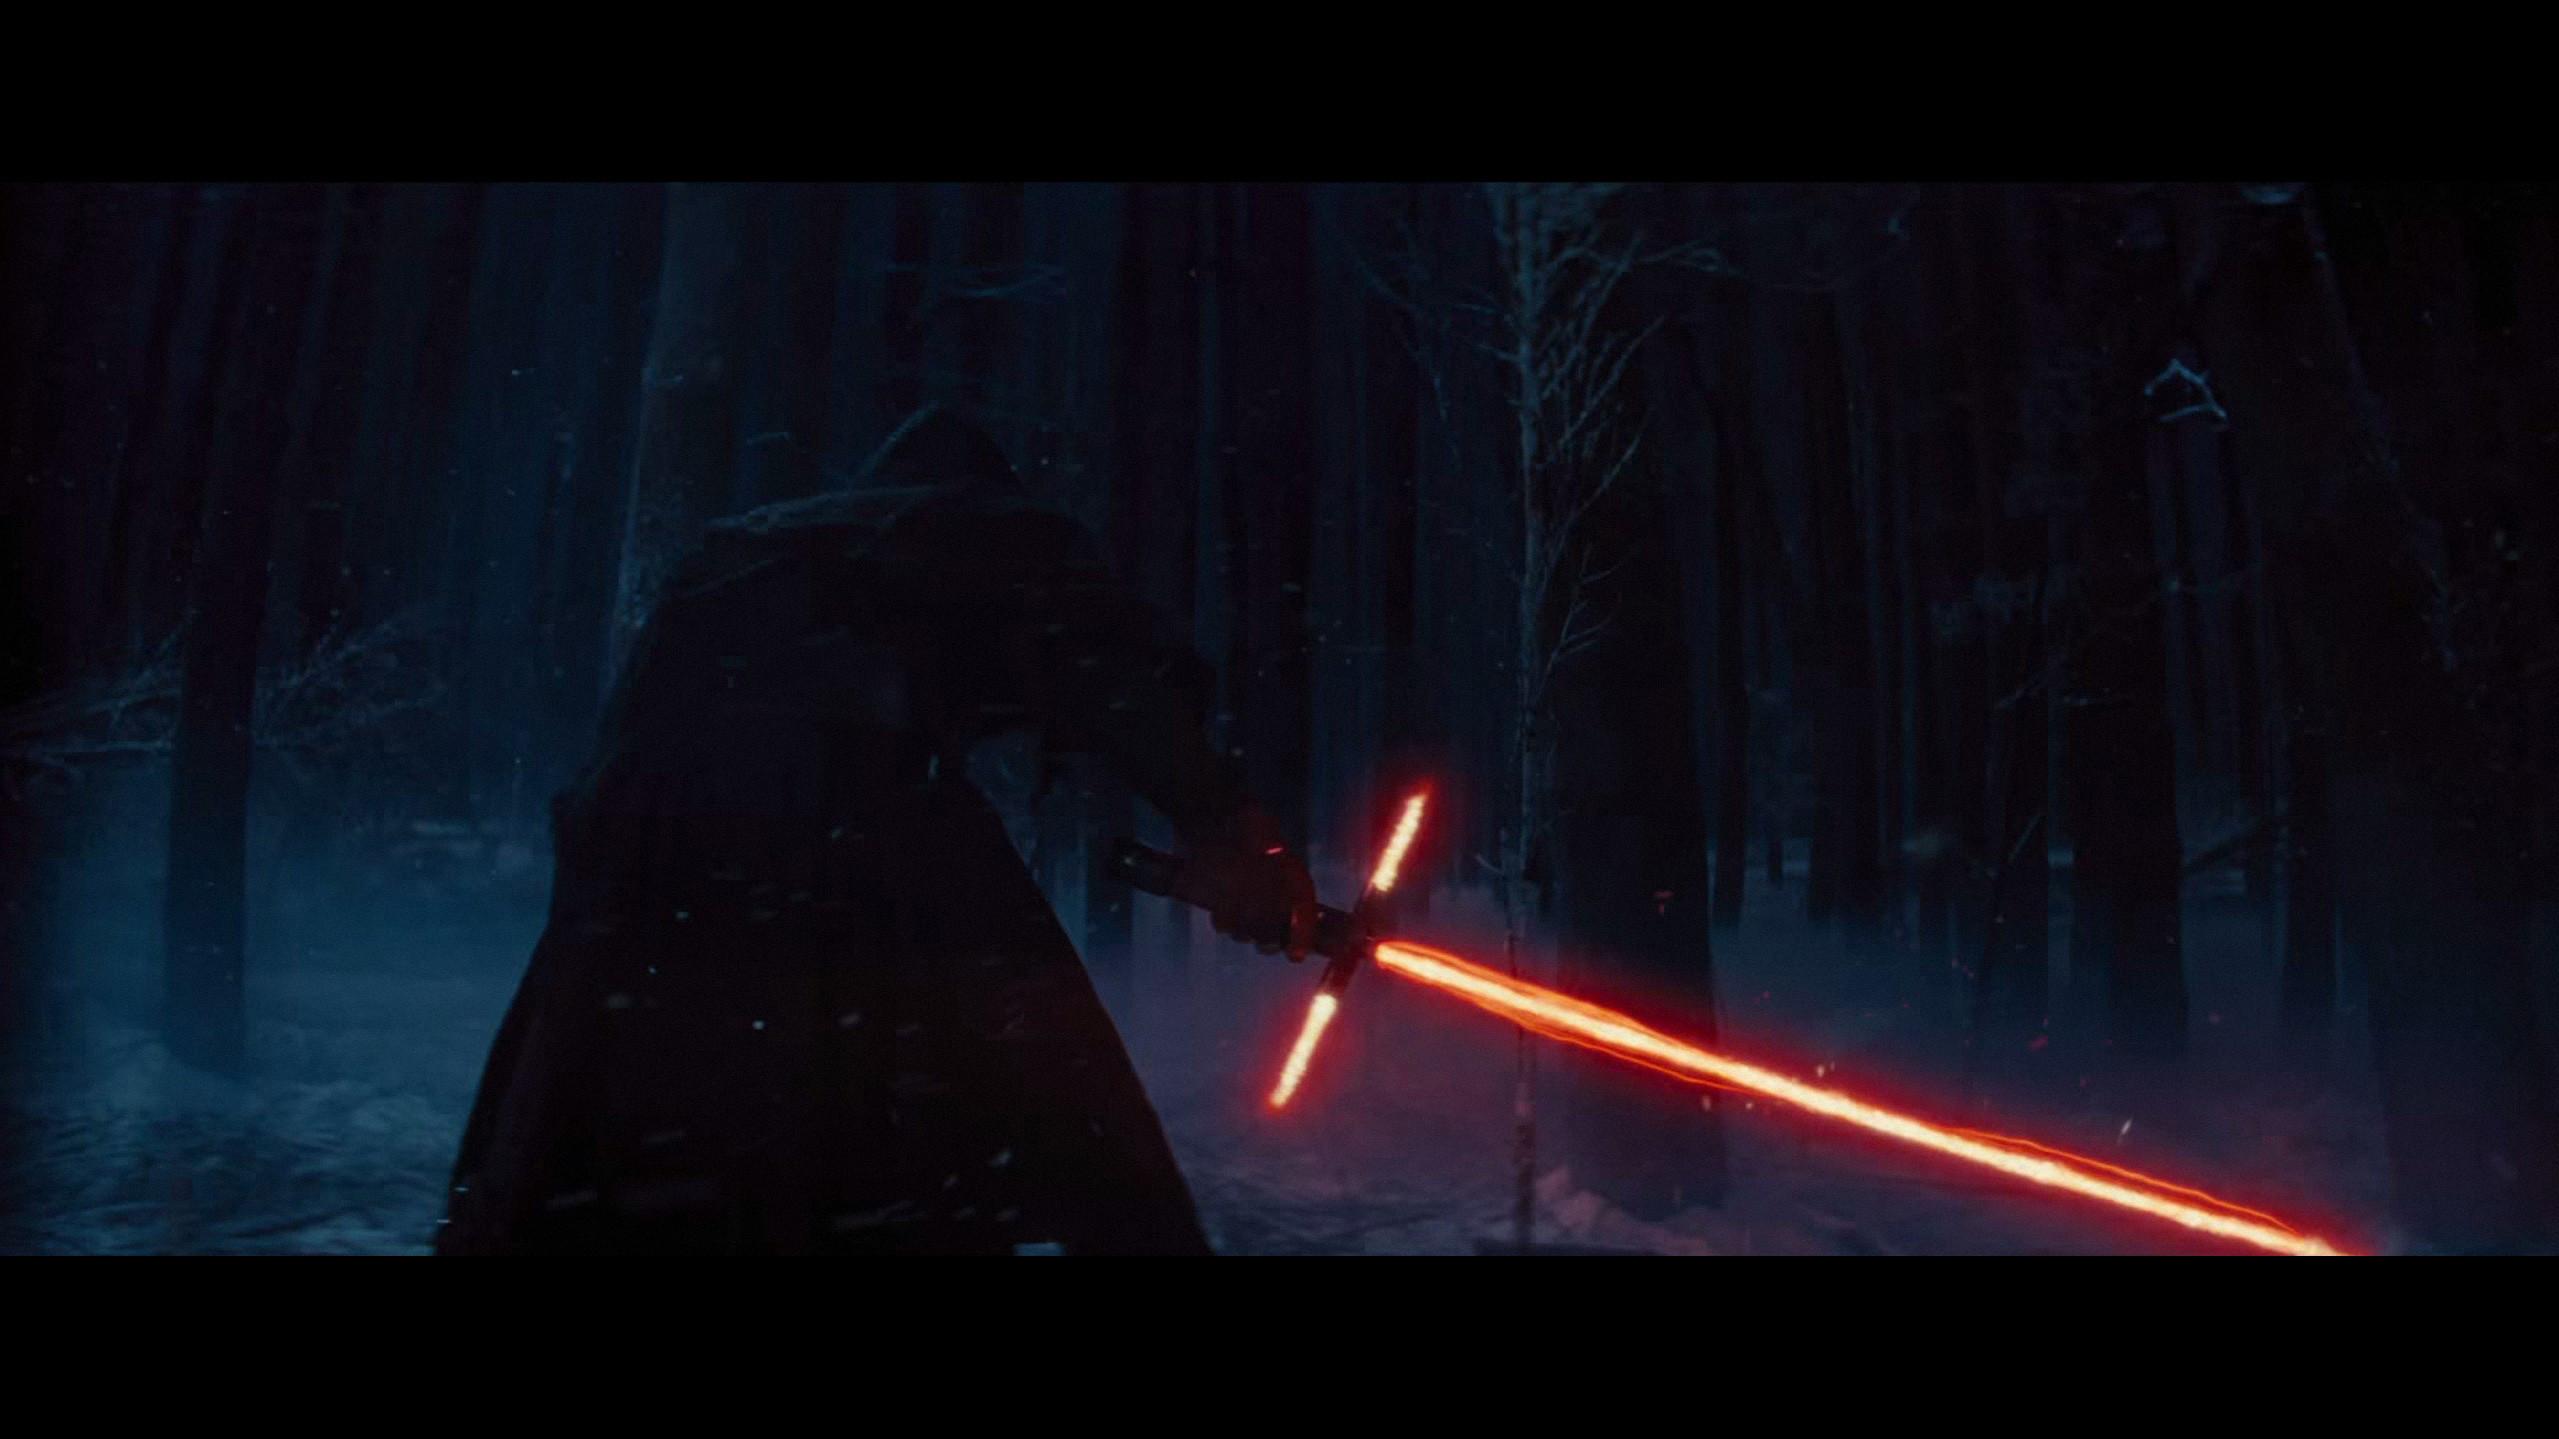 Download the Sith Crossguard Lightsaber Wallpaper, Sith